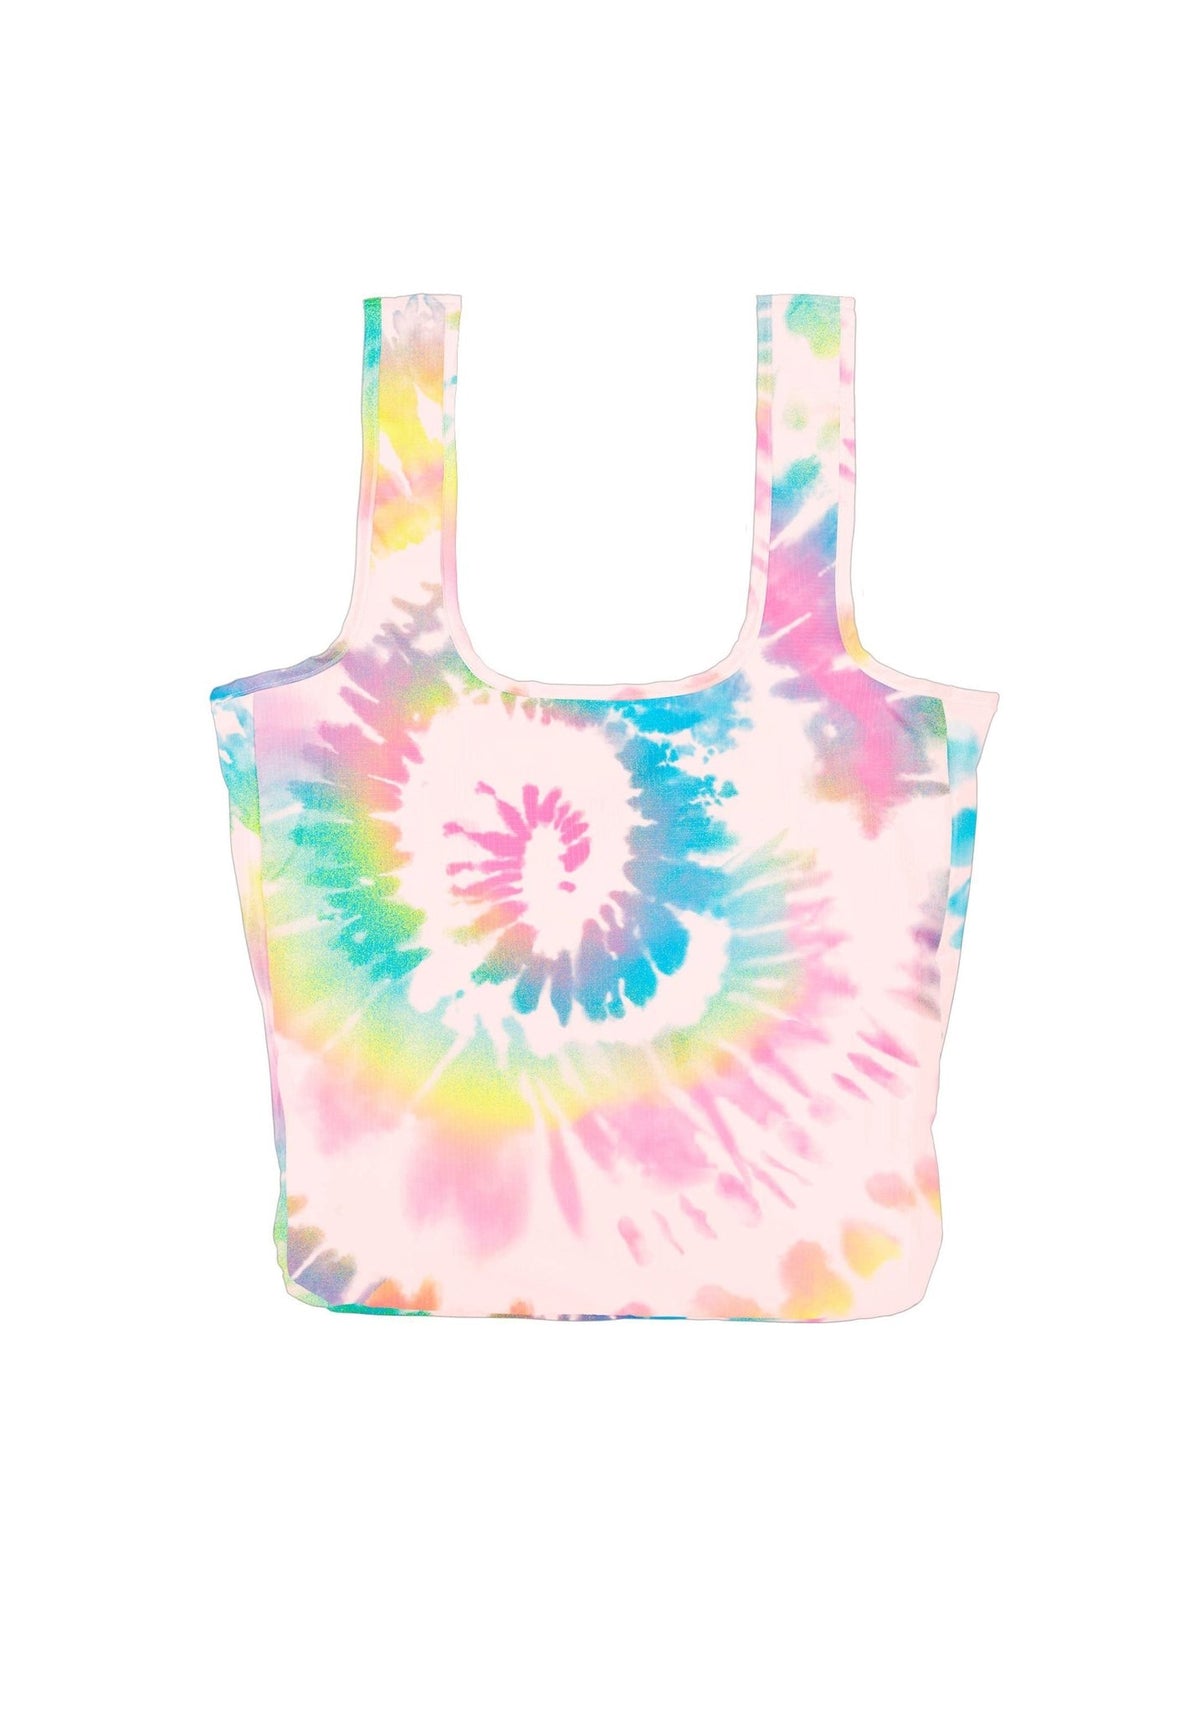 Twist & Shout Large Rainbow Tie Dye Tote Bag by Talking Out of Turn bag Faire psychadelic